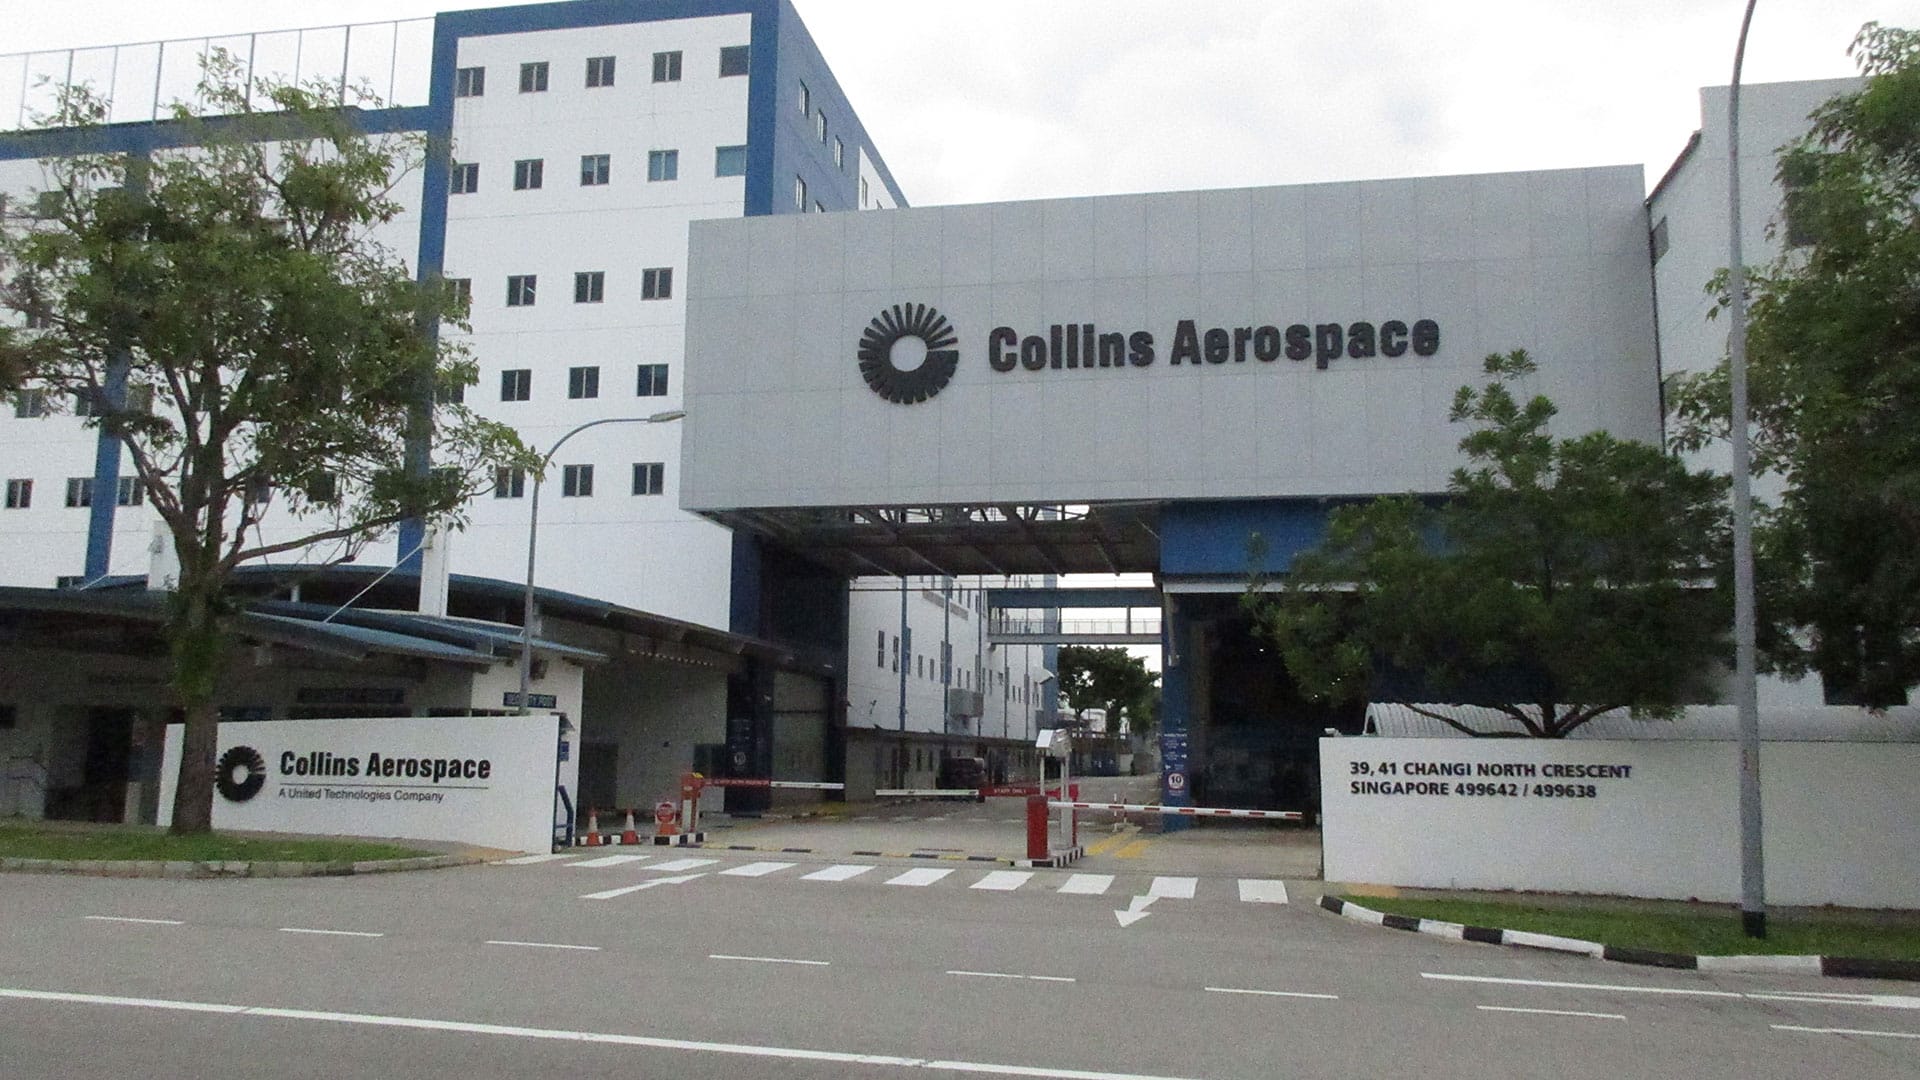 Associate Engineer Systems At Collins Aerospace